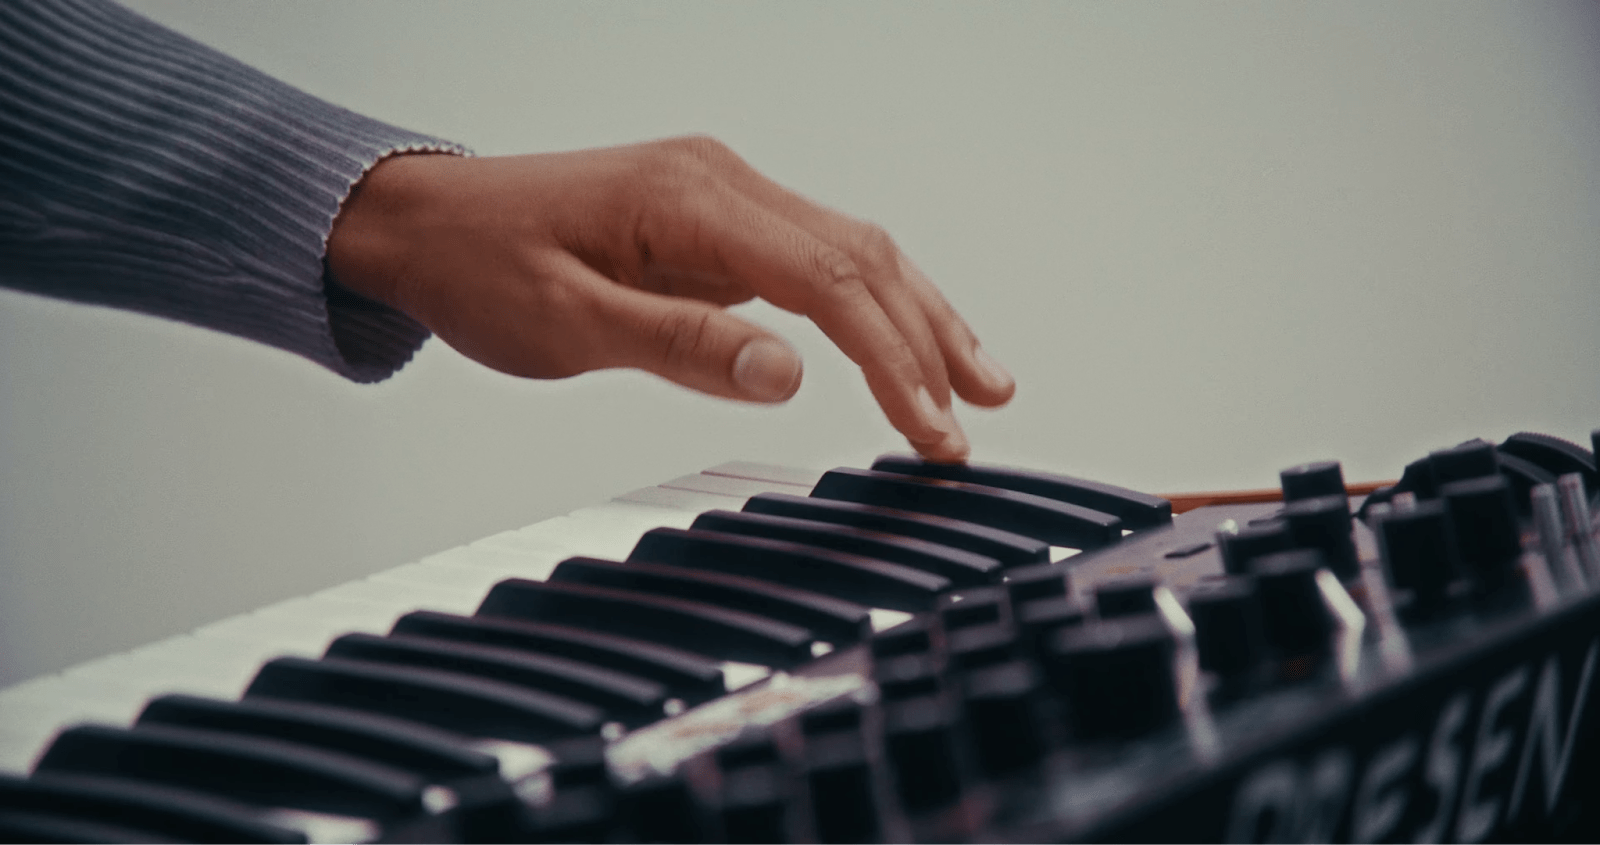 Musician’s hand playing on a keyboard